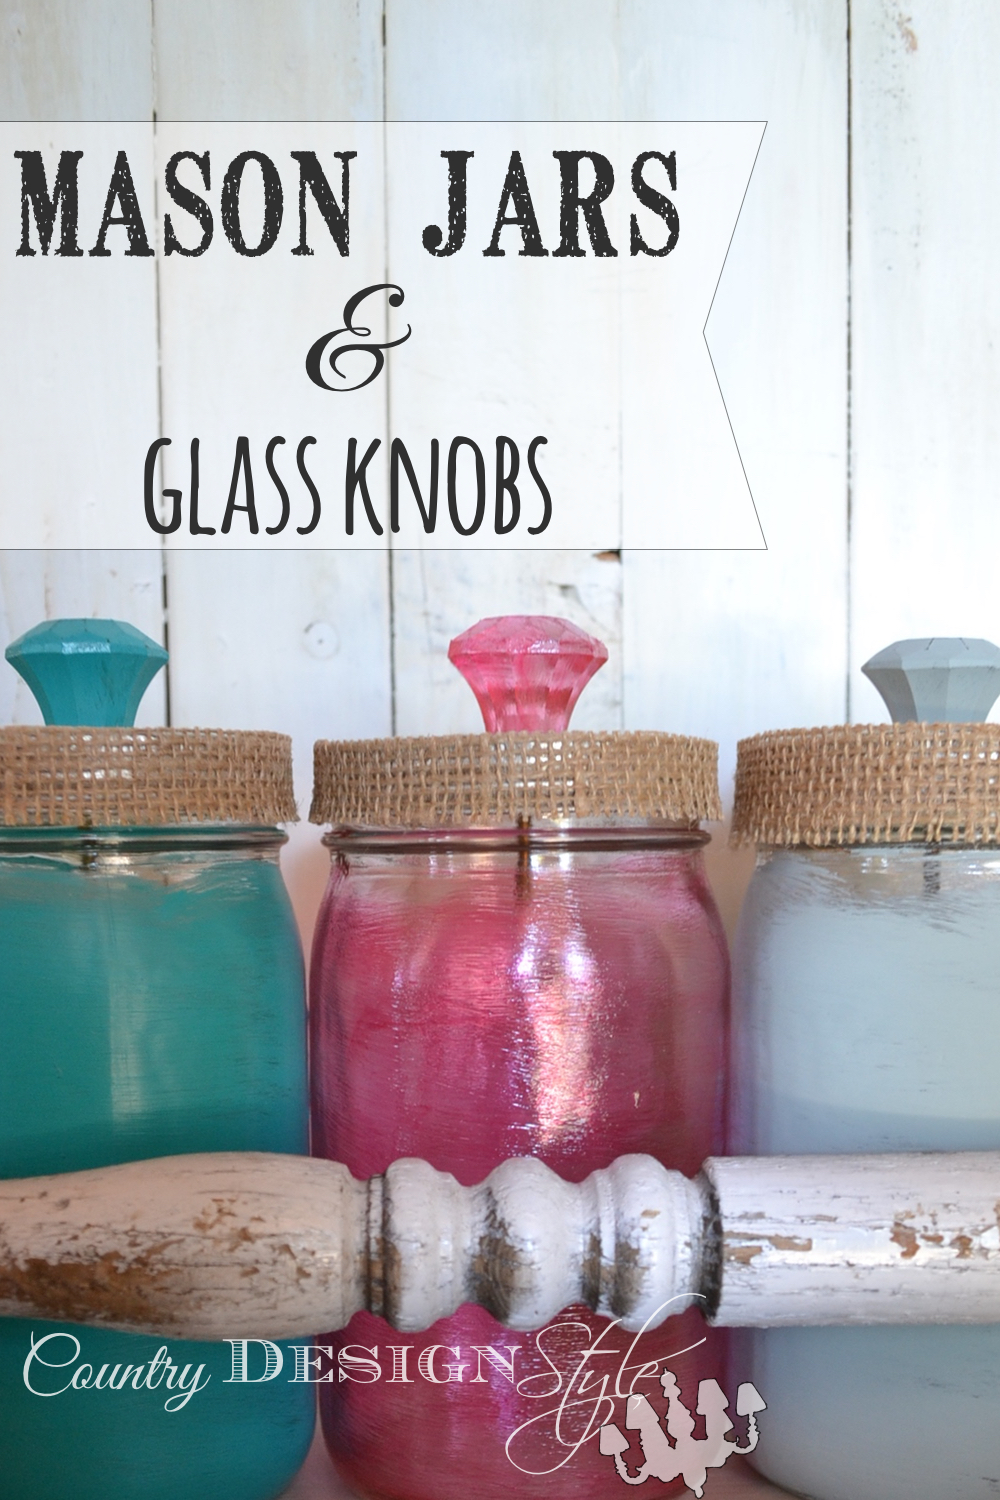 mason-jars-and-glass-knobs-country-design-style-pn2